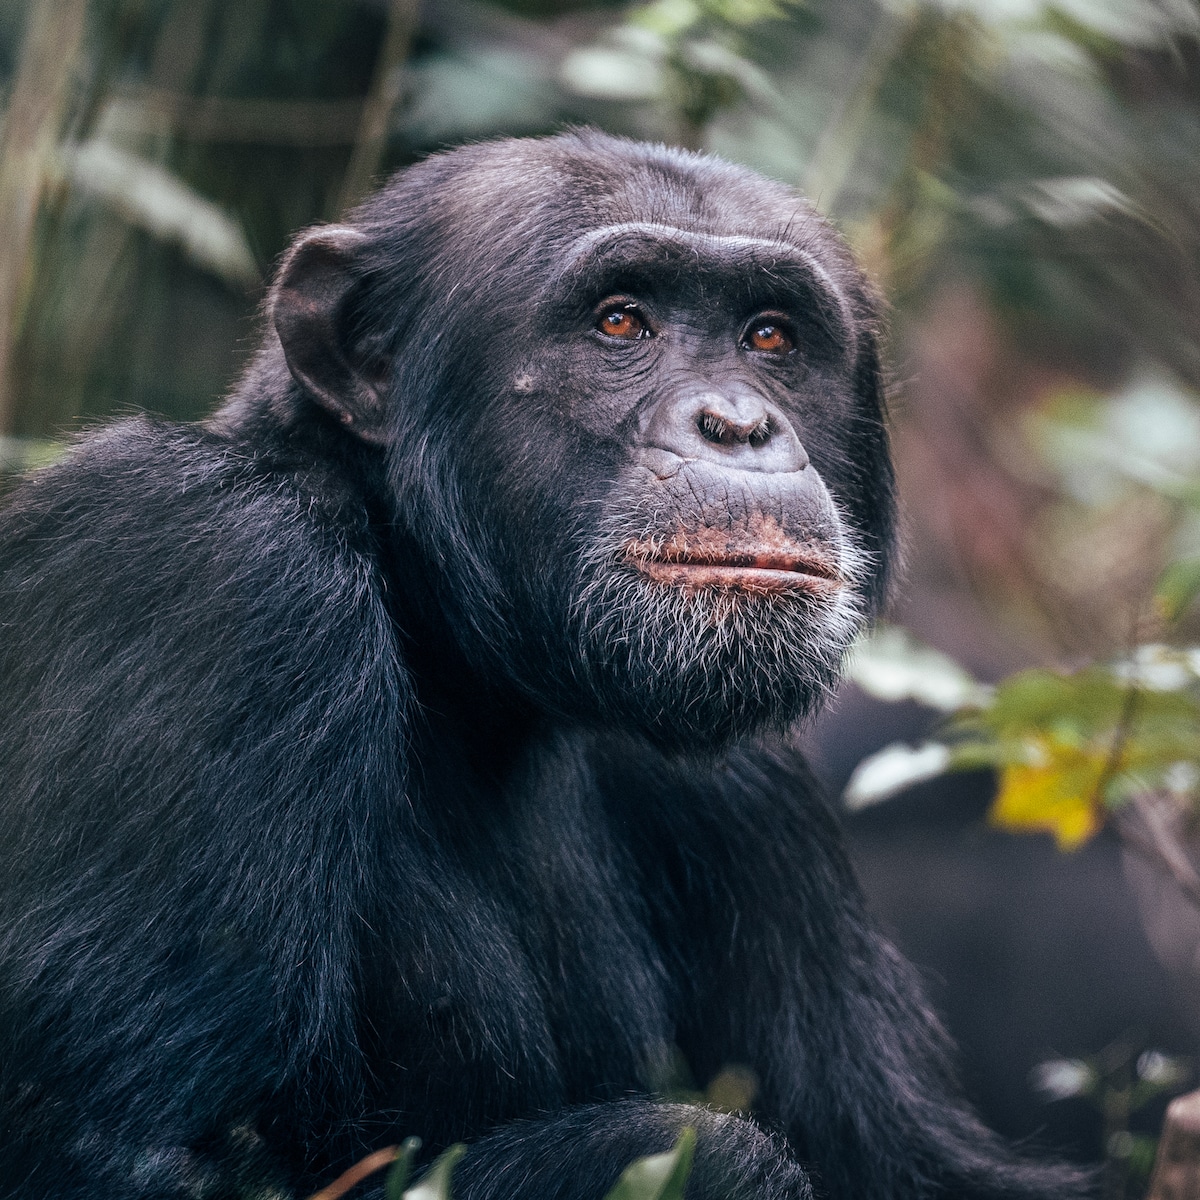 Pictures of Chimpanzees by George Turner